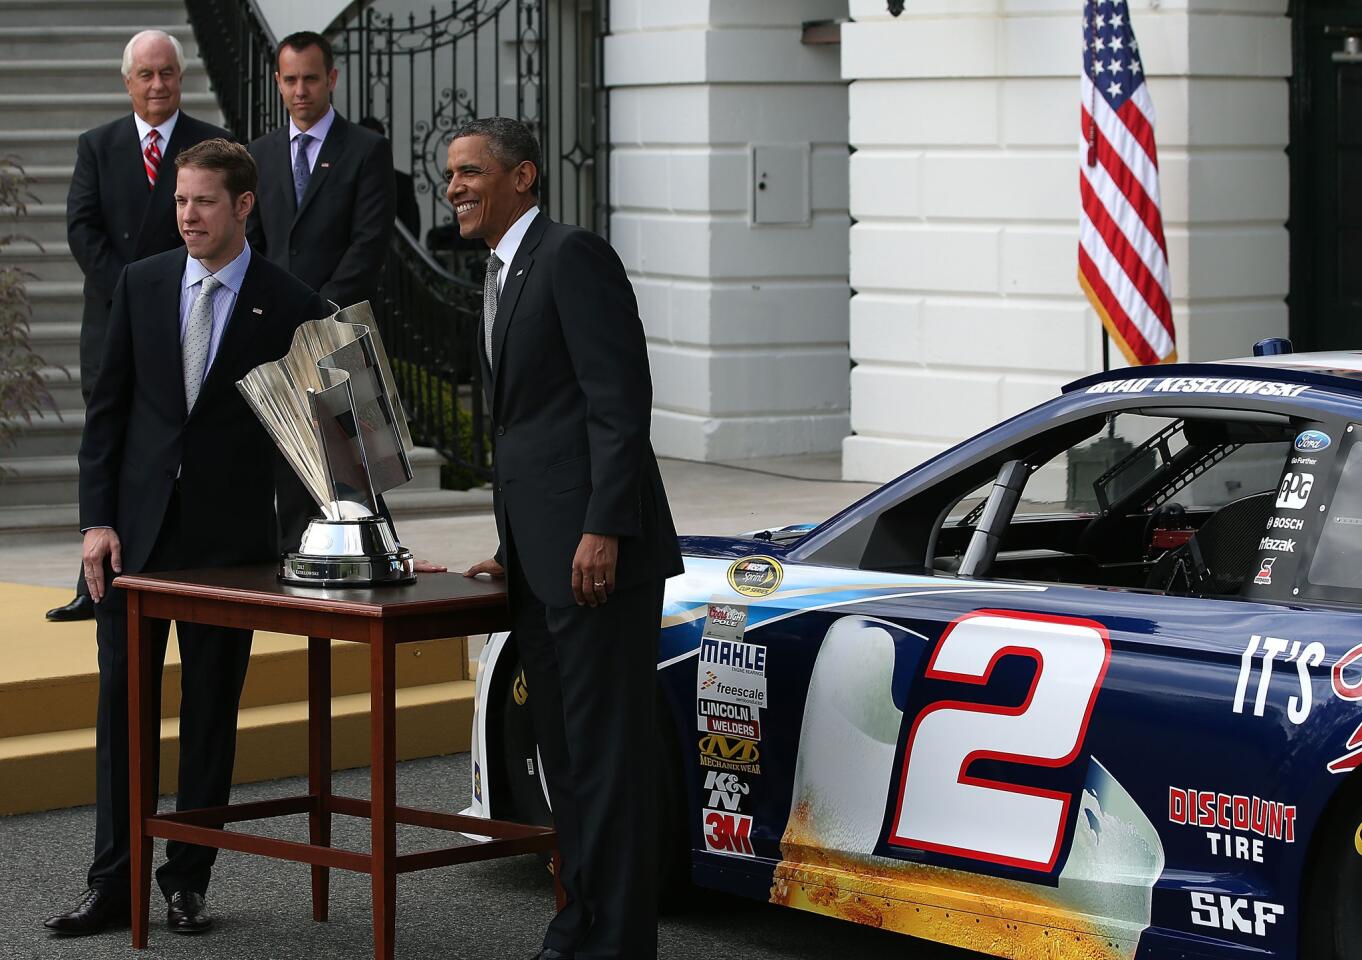 Barack Obama welcomes NASCAR Sprint Cup champion Brad Keselowski to the White House, while owner Roger Penske and crew chief Paul Wolfe stand nearby.